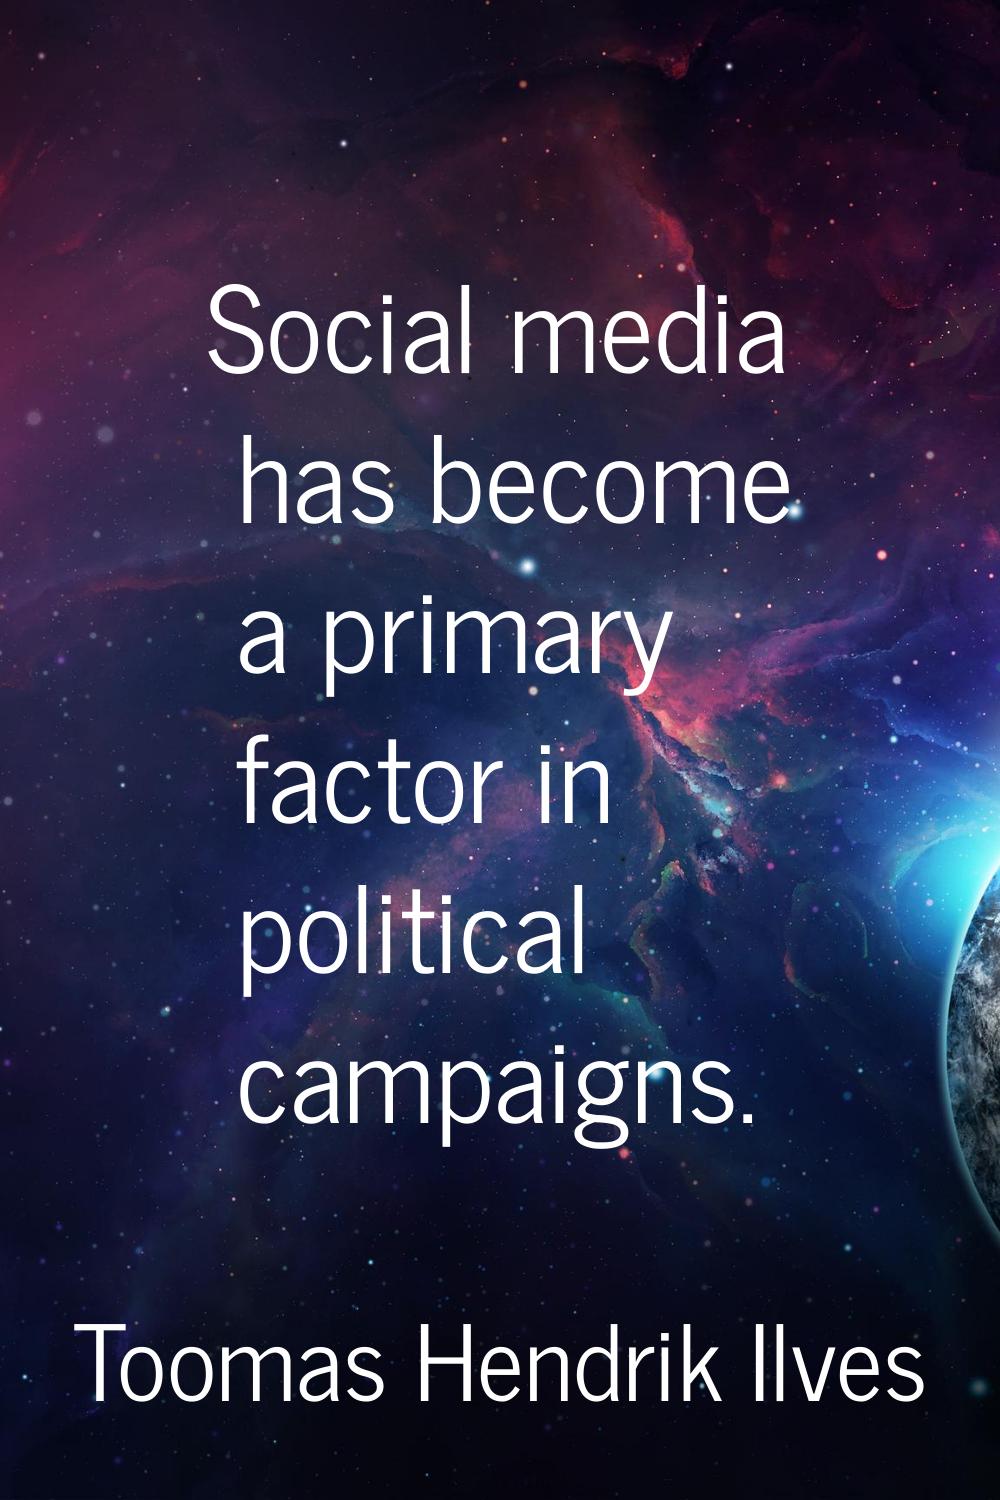 Social media has become a primary factor in political campaigns.